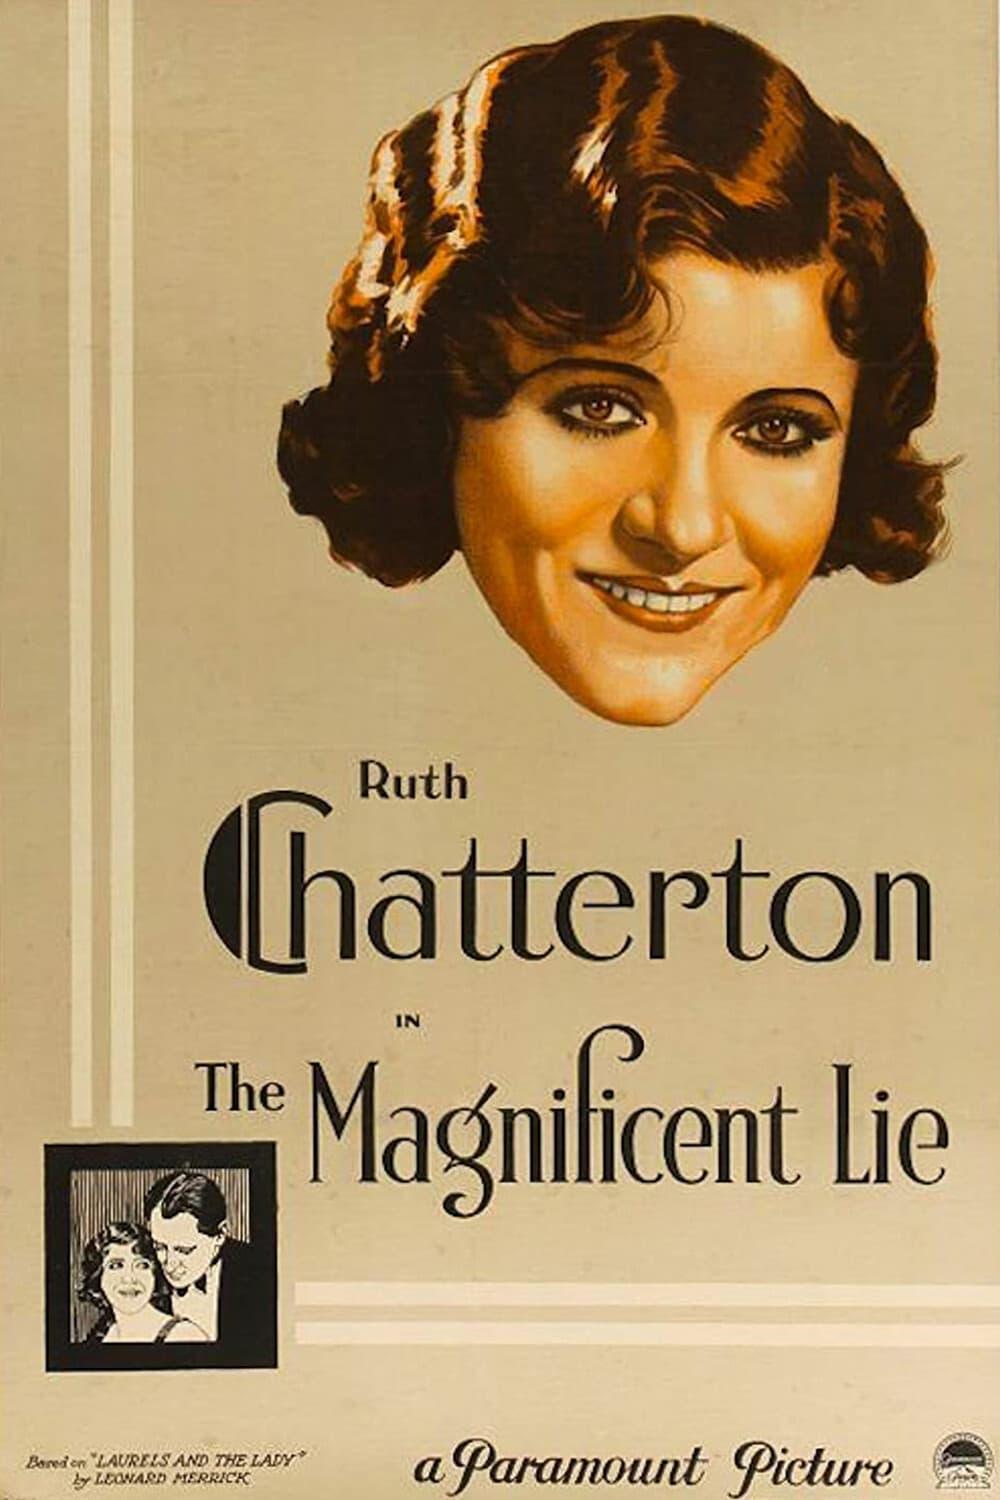 The Magnificent Lie poster